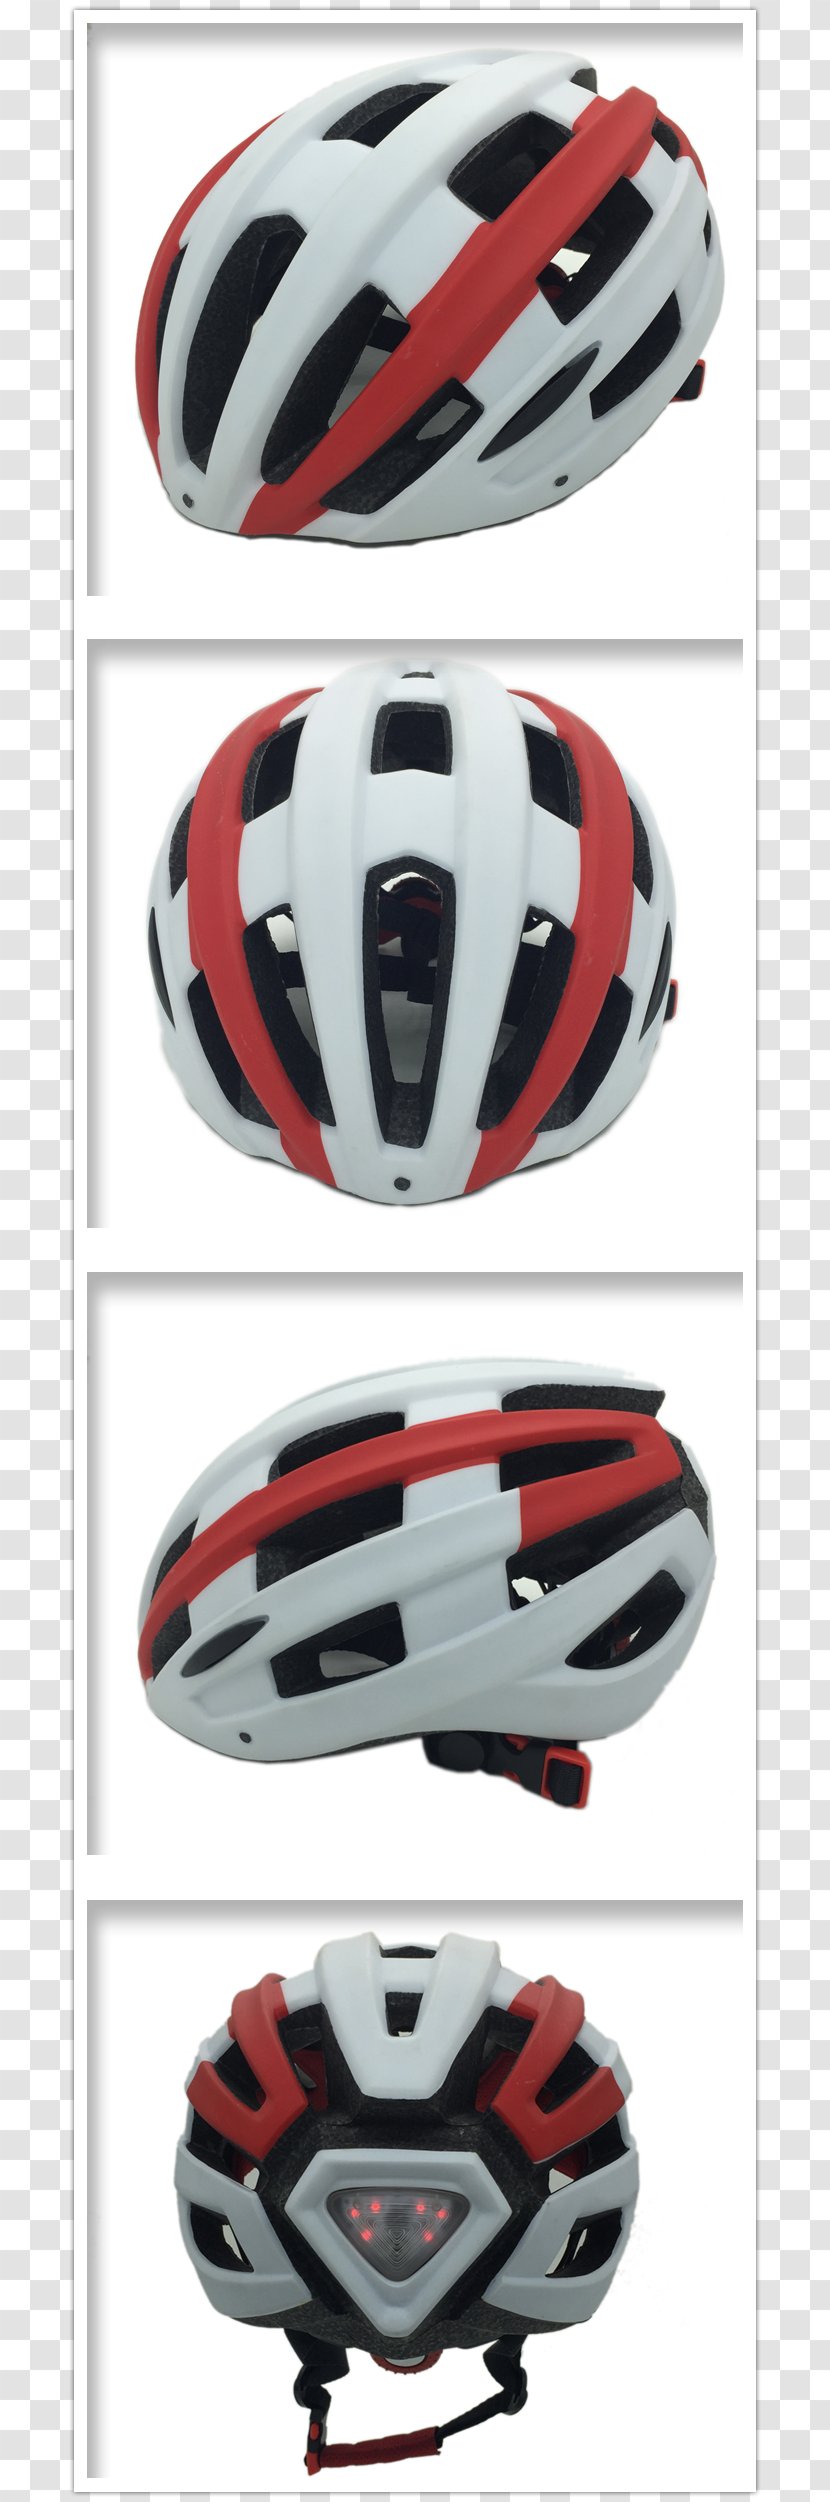 Motorcycle Helmets Bicycle Cycling Mountain Bike - Sports Equipment Transparent PNG